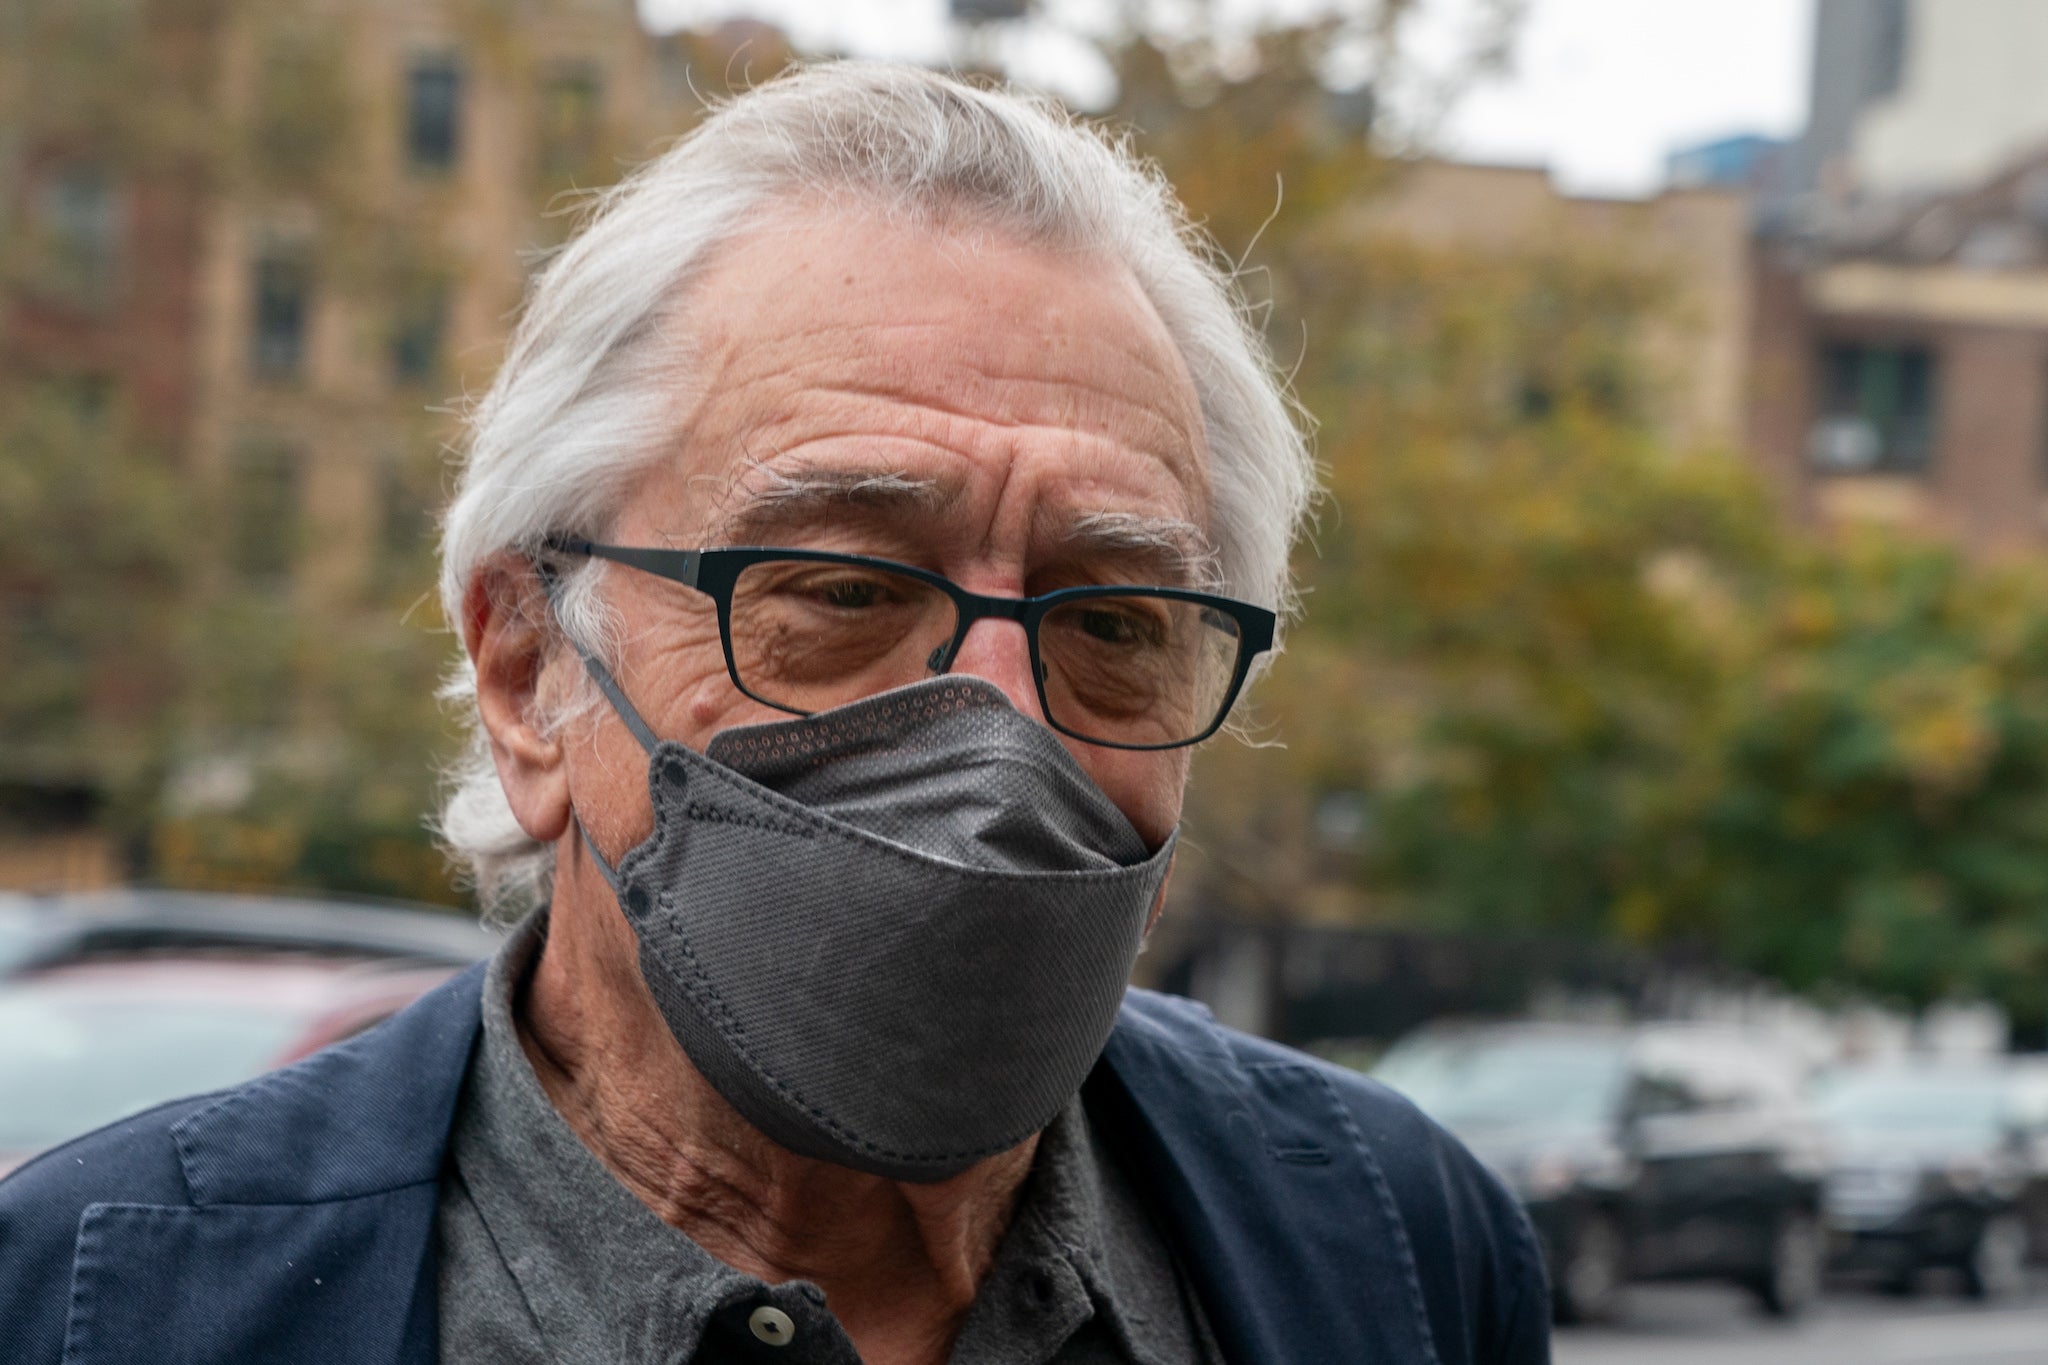 Robert De Niro arrives at federal court on 30 October 2023 in New York City to testify in workplace discrimination case brought by his former assistant